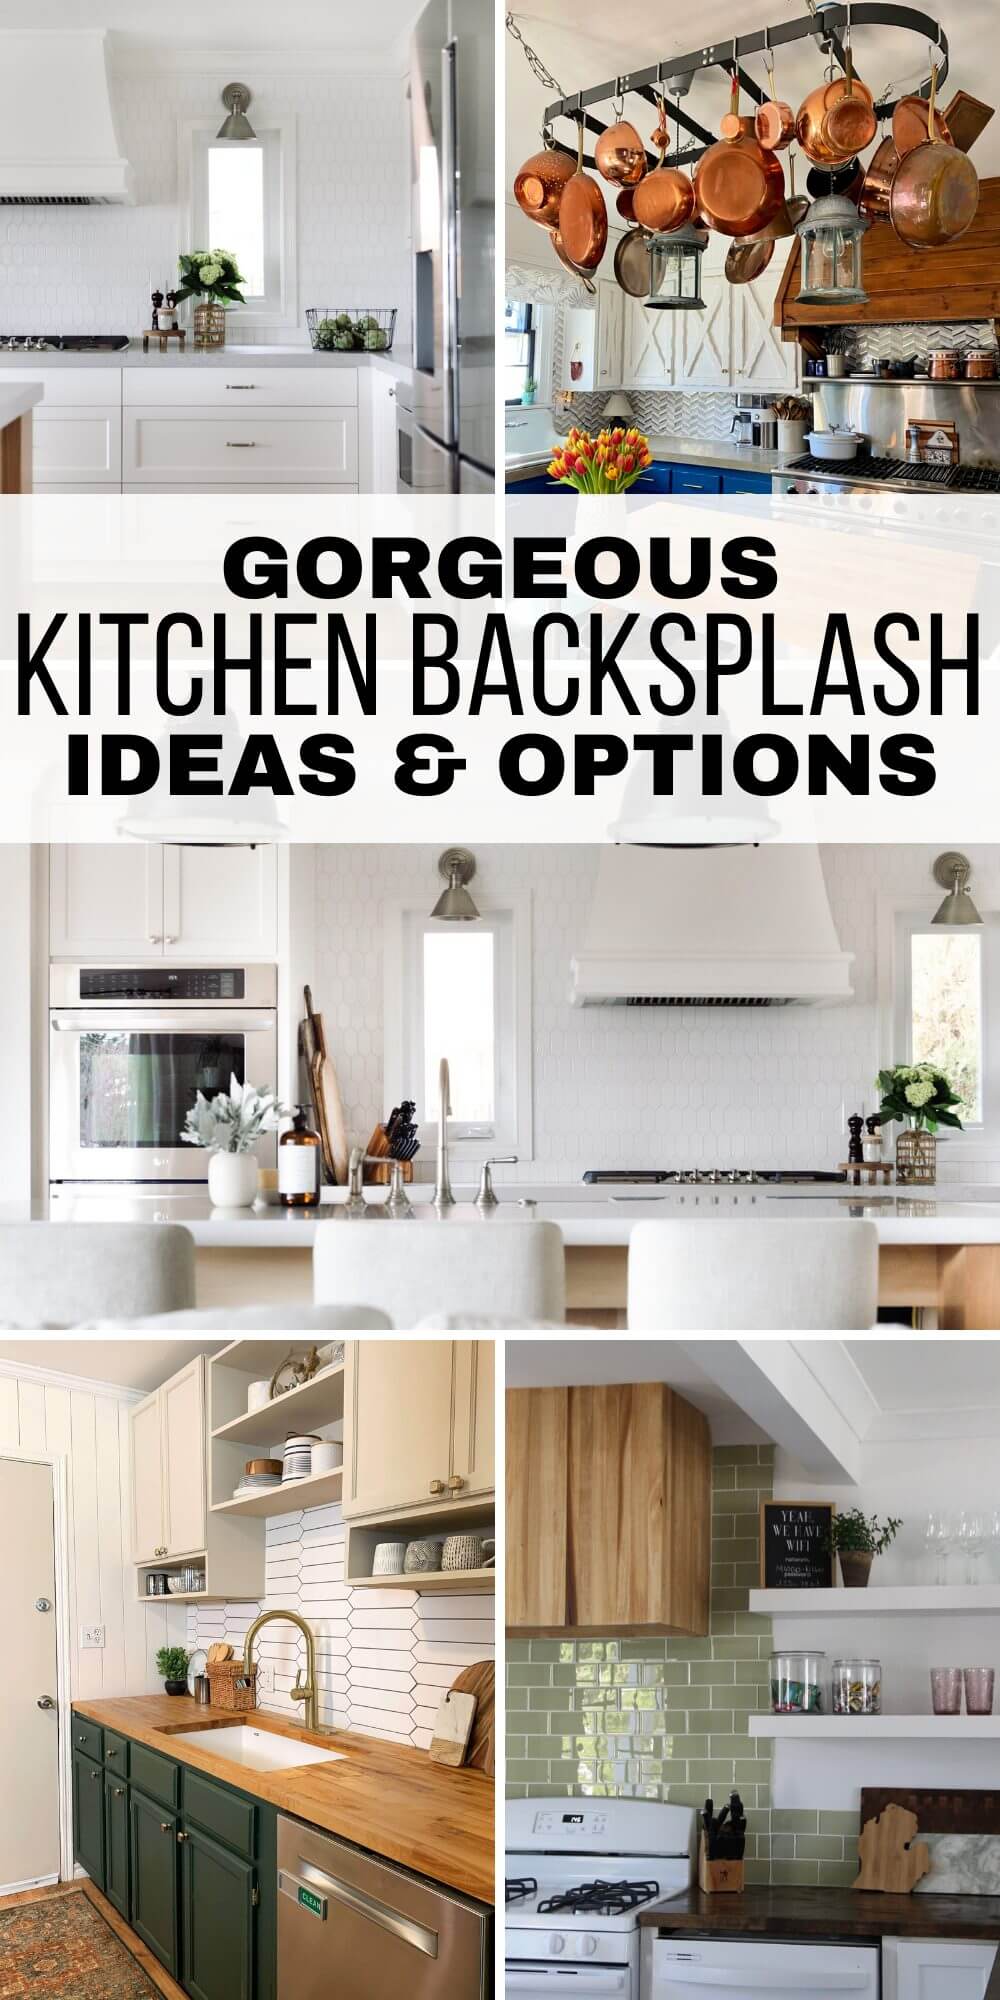 Gorgeous kitchen backsplash ideas from simple to elaborate, affordable to expensive, and how to choose the right material for your home. See the many different options available for home owners and even renters can use!